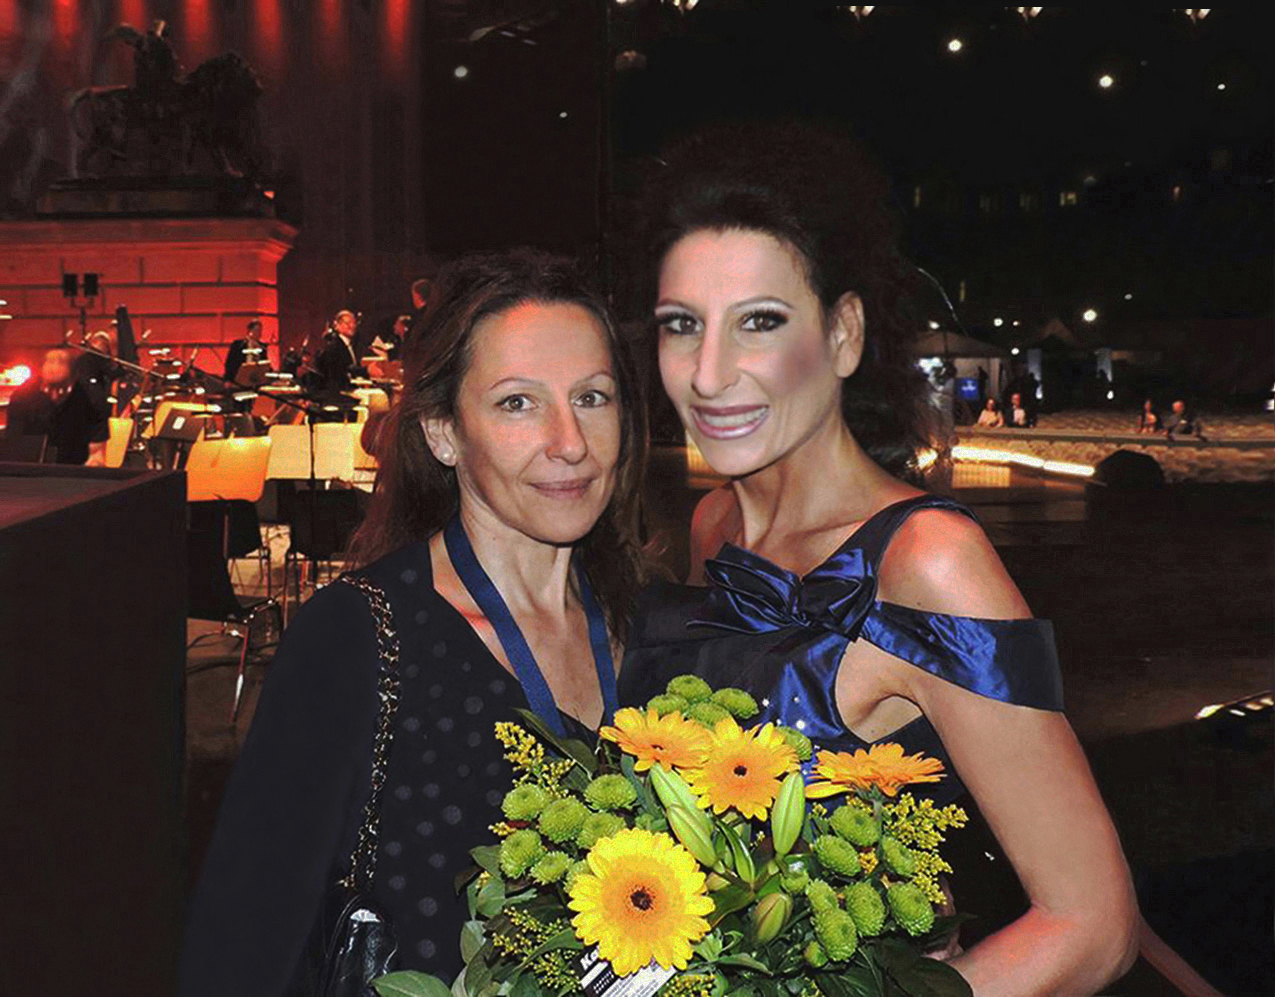 Lucia Aliberti with her Beloved Sister"Pinella"⚘Special Concert⚘Gendarmenmarkt⚘Classic Open Air⚘Berlin⚘Escada Fashion⚘On Stage⚘:http://www.luciaaliberti.it #luciaaliberti #gendarmenmarkt #classicopenair #berlin #concert  #onstage #escadafashion